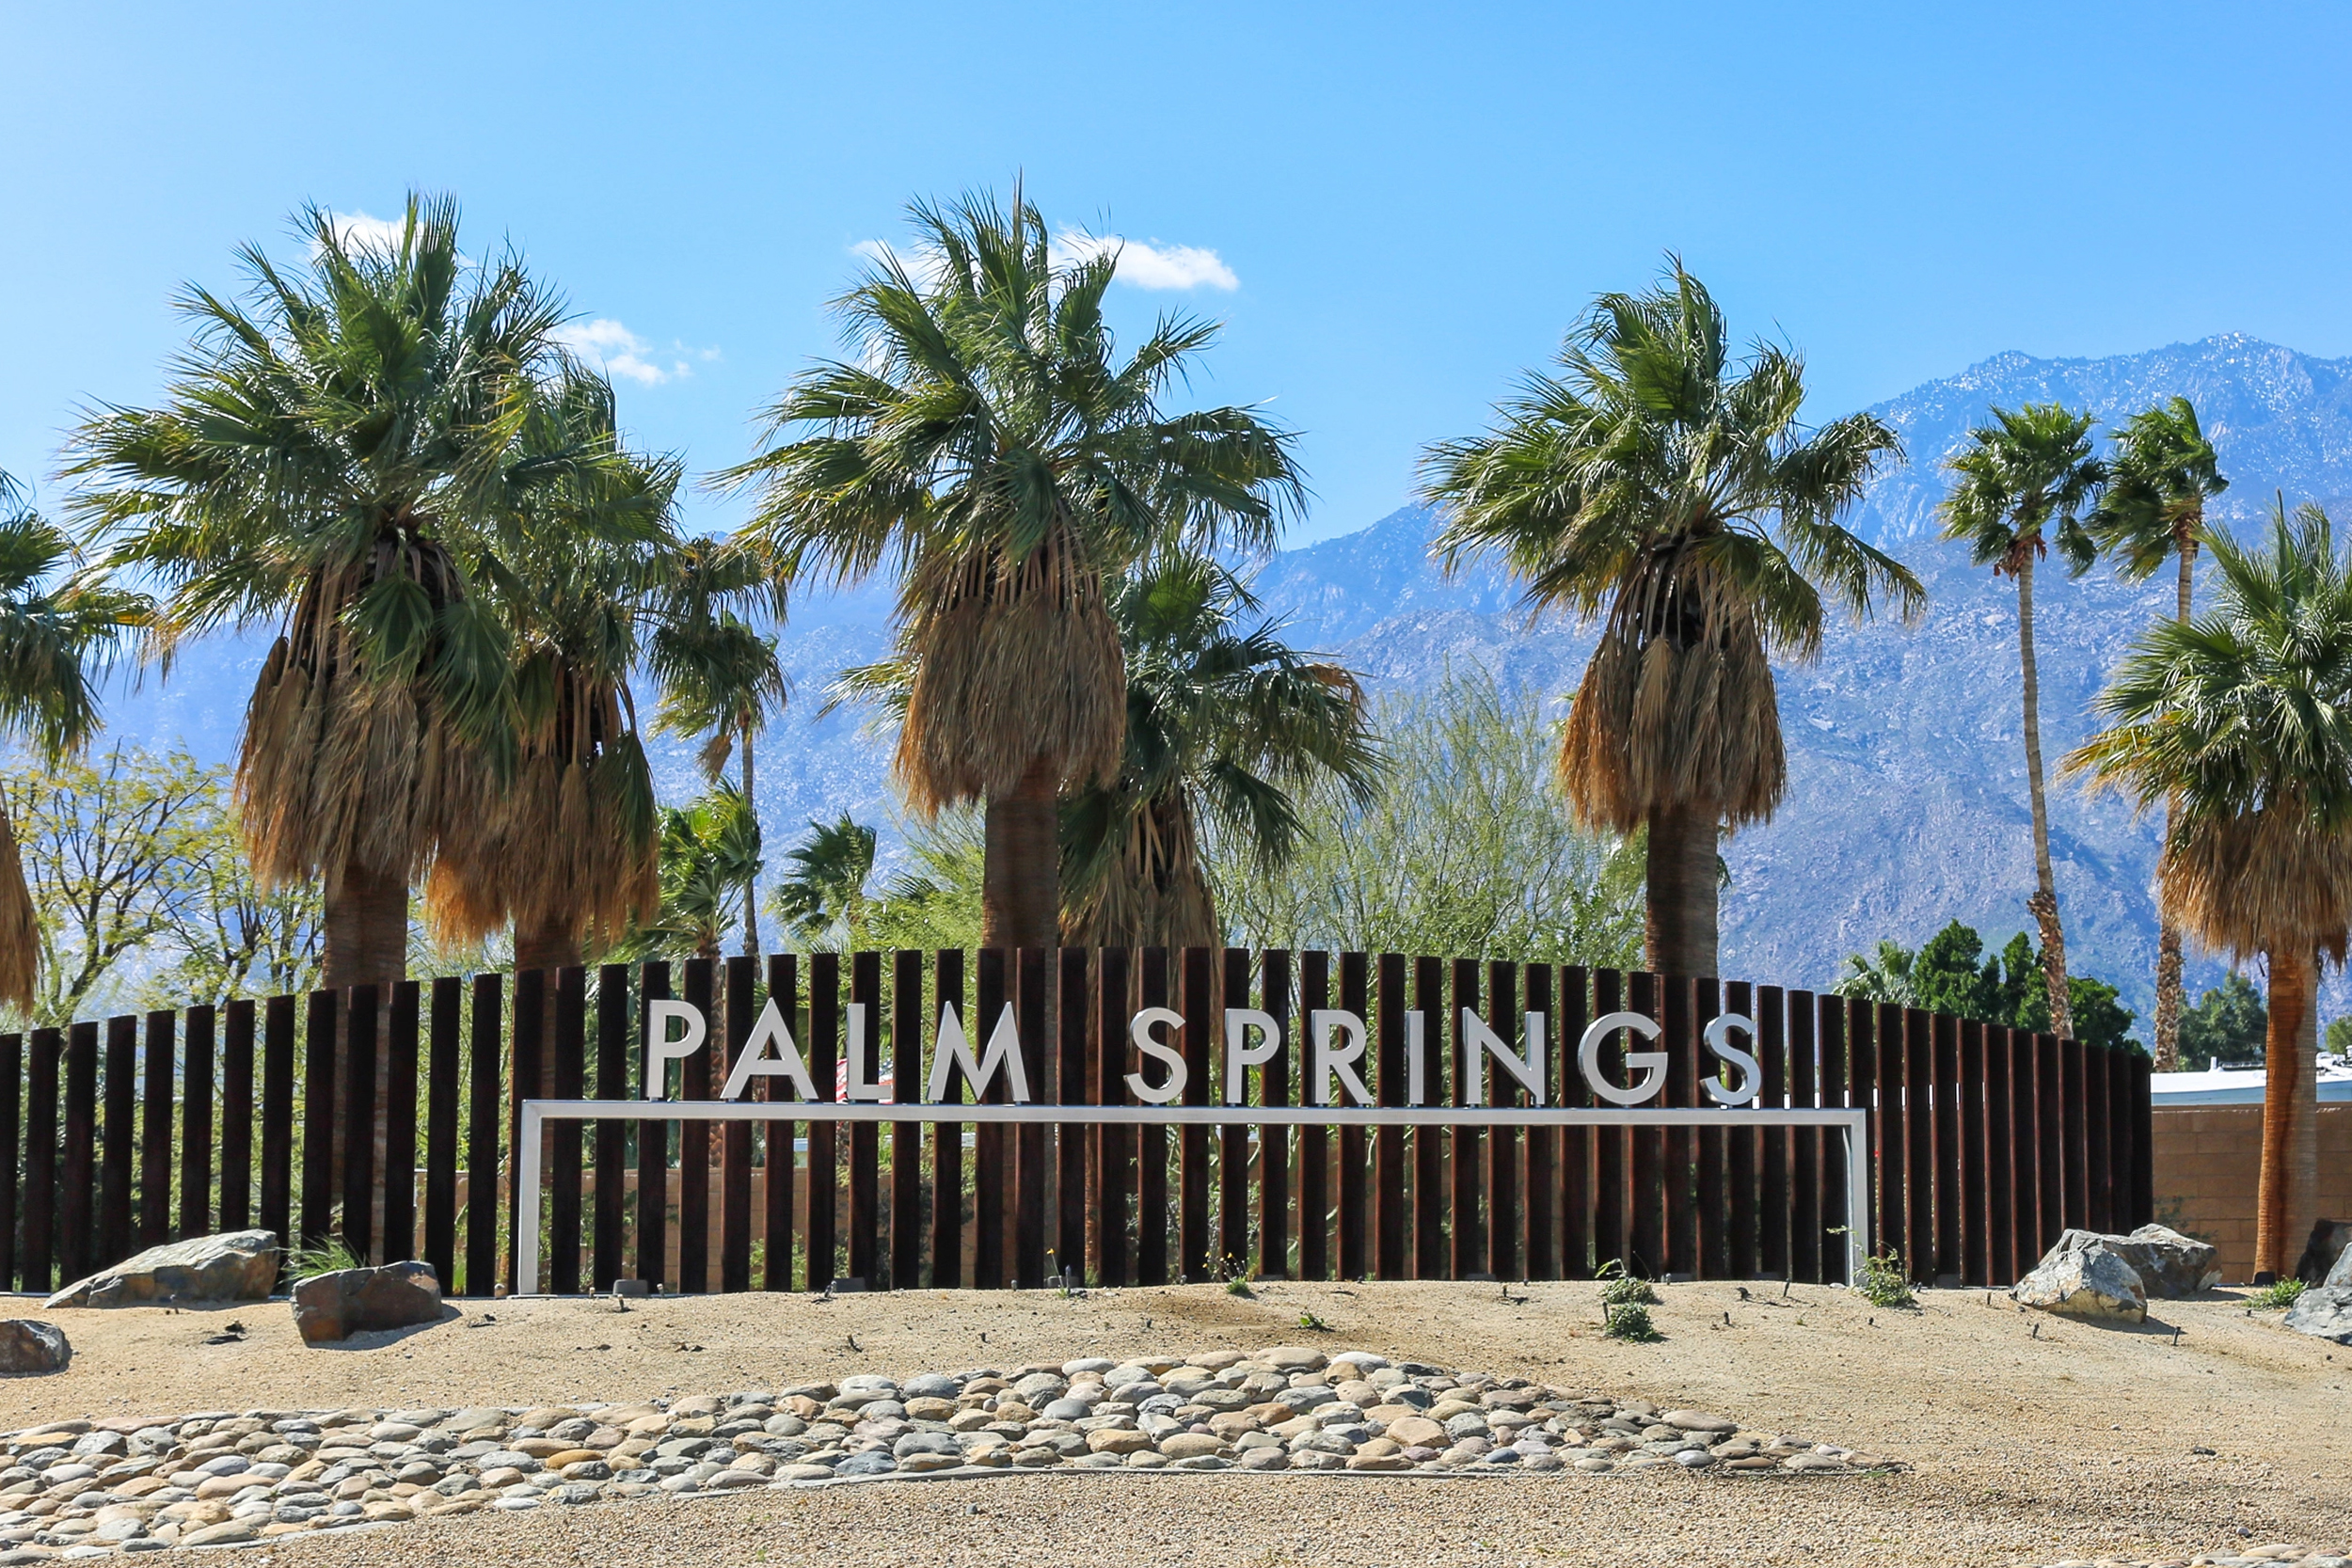 Photo of an outdoor Palm Springs sign.